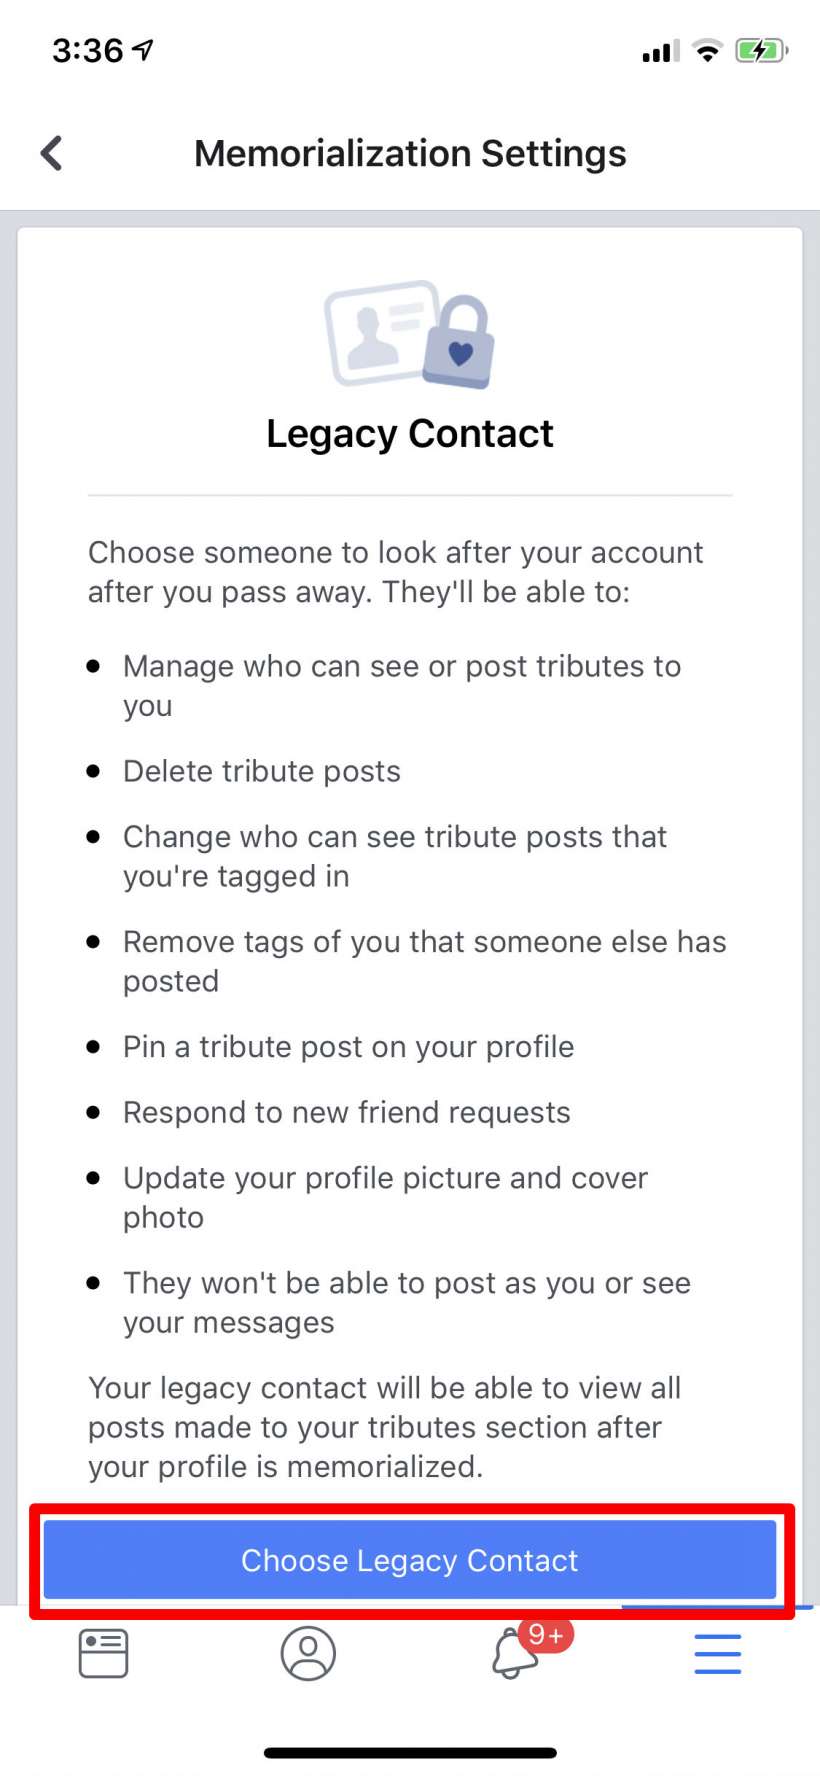 How to add a legacy contact and have your Facebook account deleted after you die.